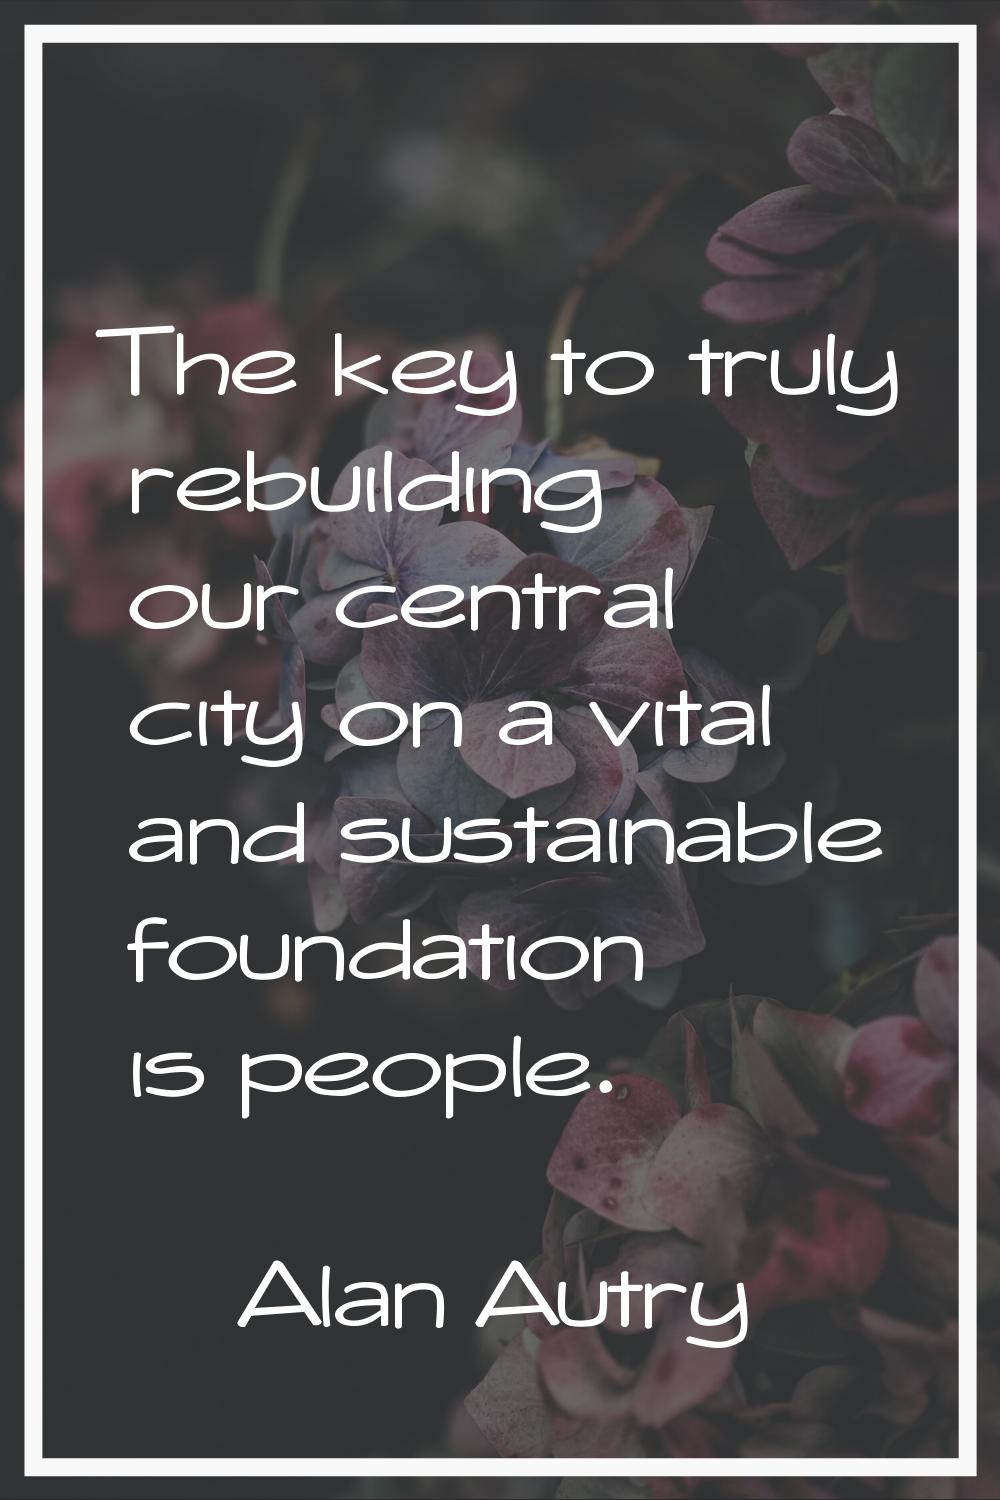 The key to truly rebuilding our central city on a vital and sustainable foundation is people.